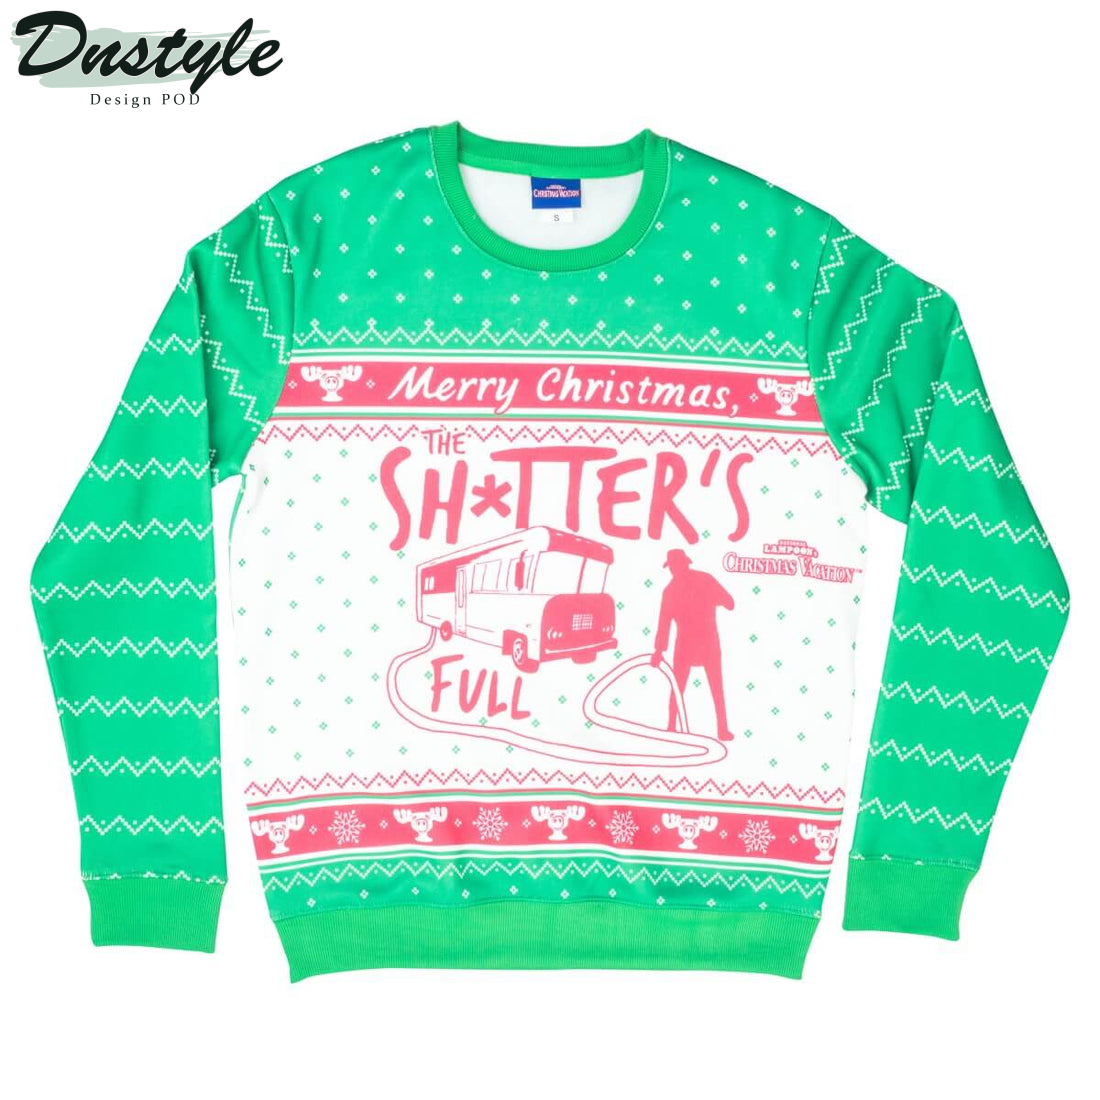 National Lampoons Christmas Vacation Shitters Full Ugly Christmas Sweater